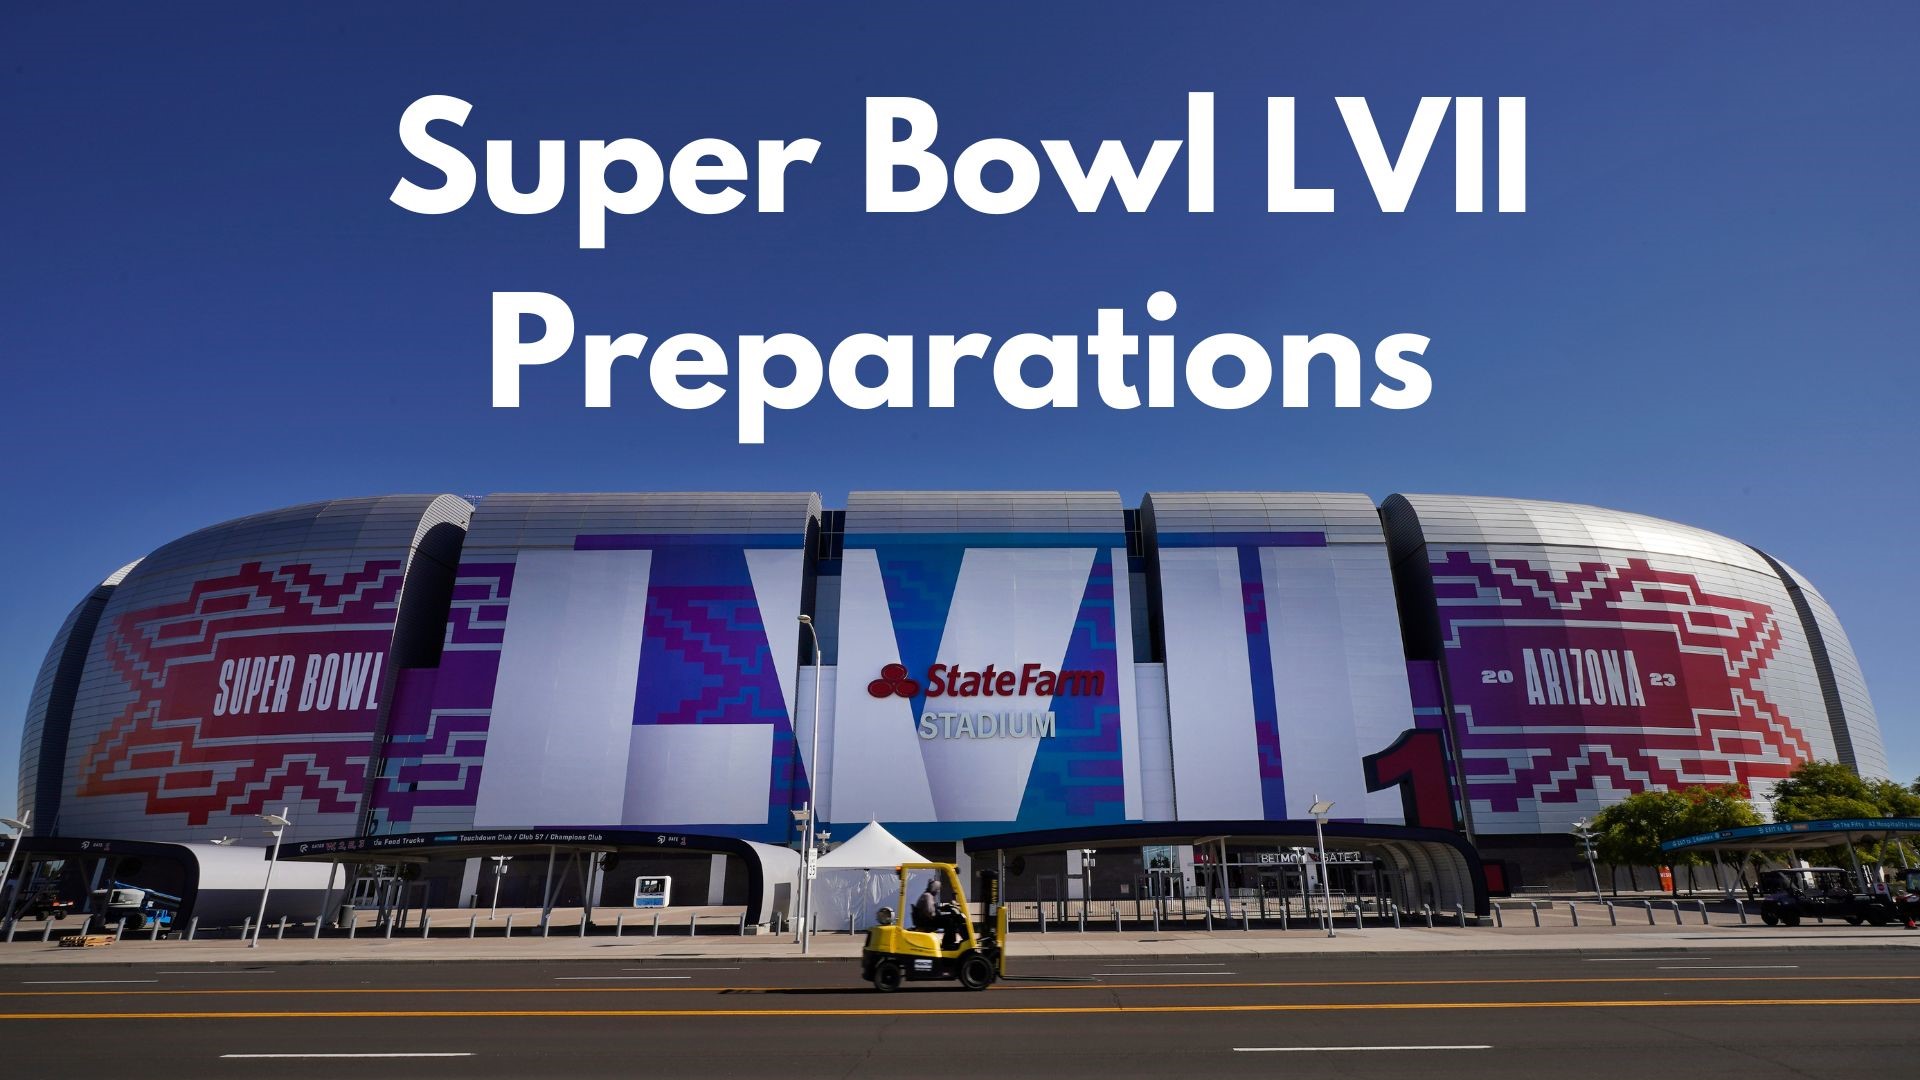 A look at how law enforcement, businesses, hotels and more are preparing for Super Bowl LVII in Arizona.